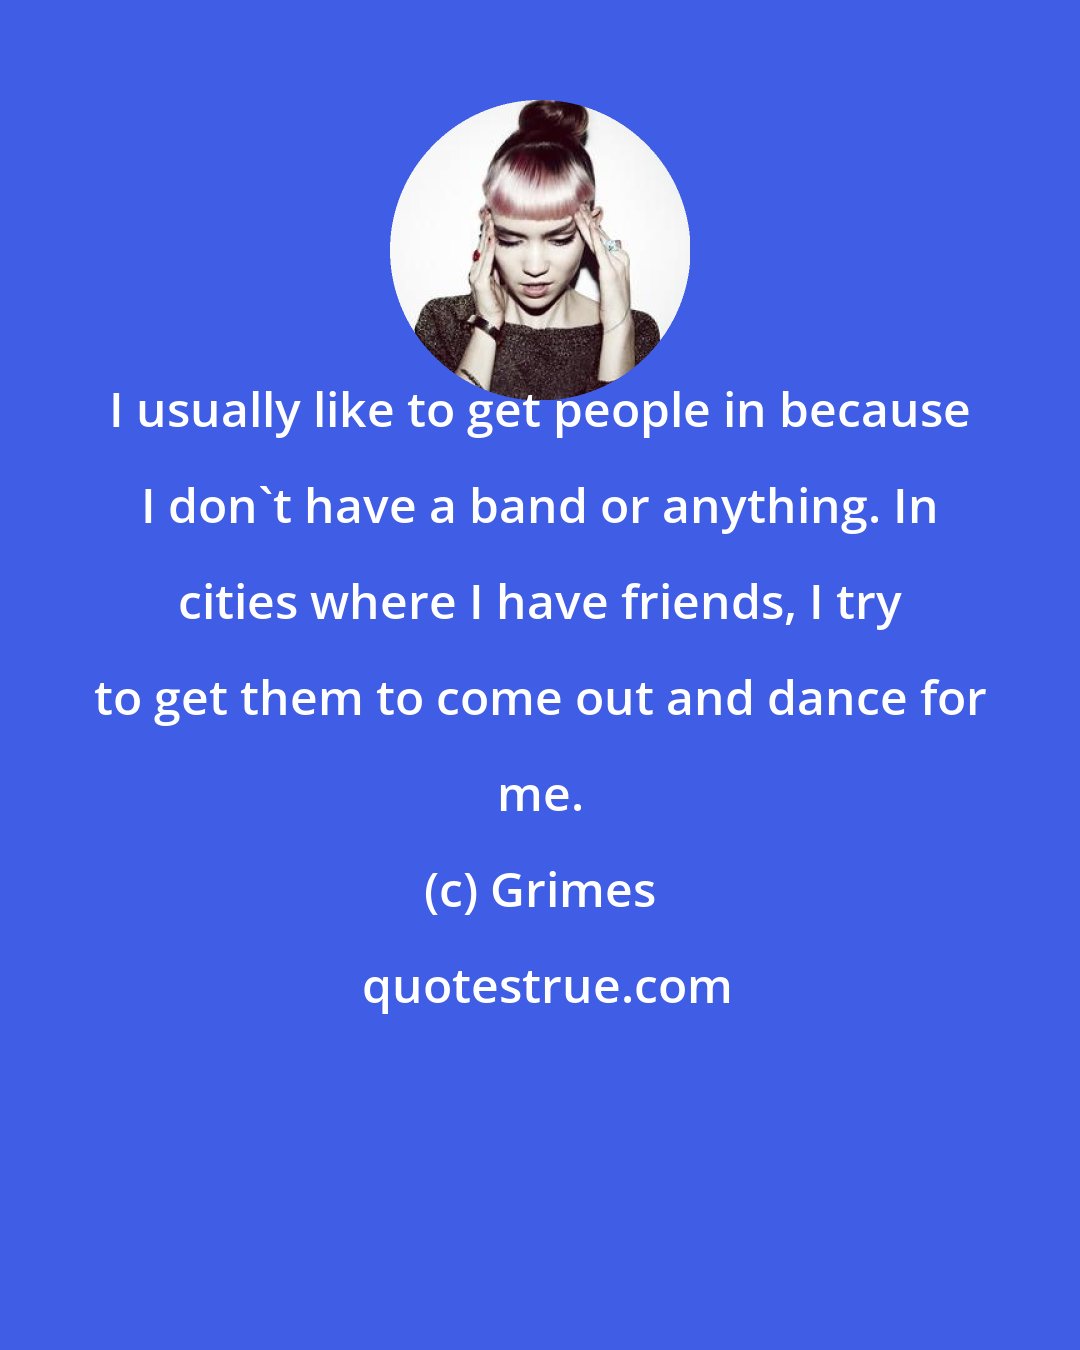 Grimes: I usually like to get people in because I don't have a band or anything. In cities where I have friends, I try to get them to come out and dance for me.